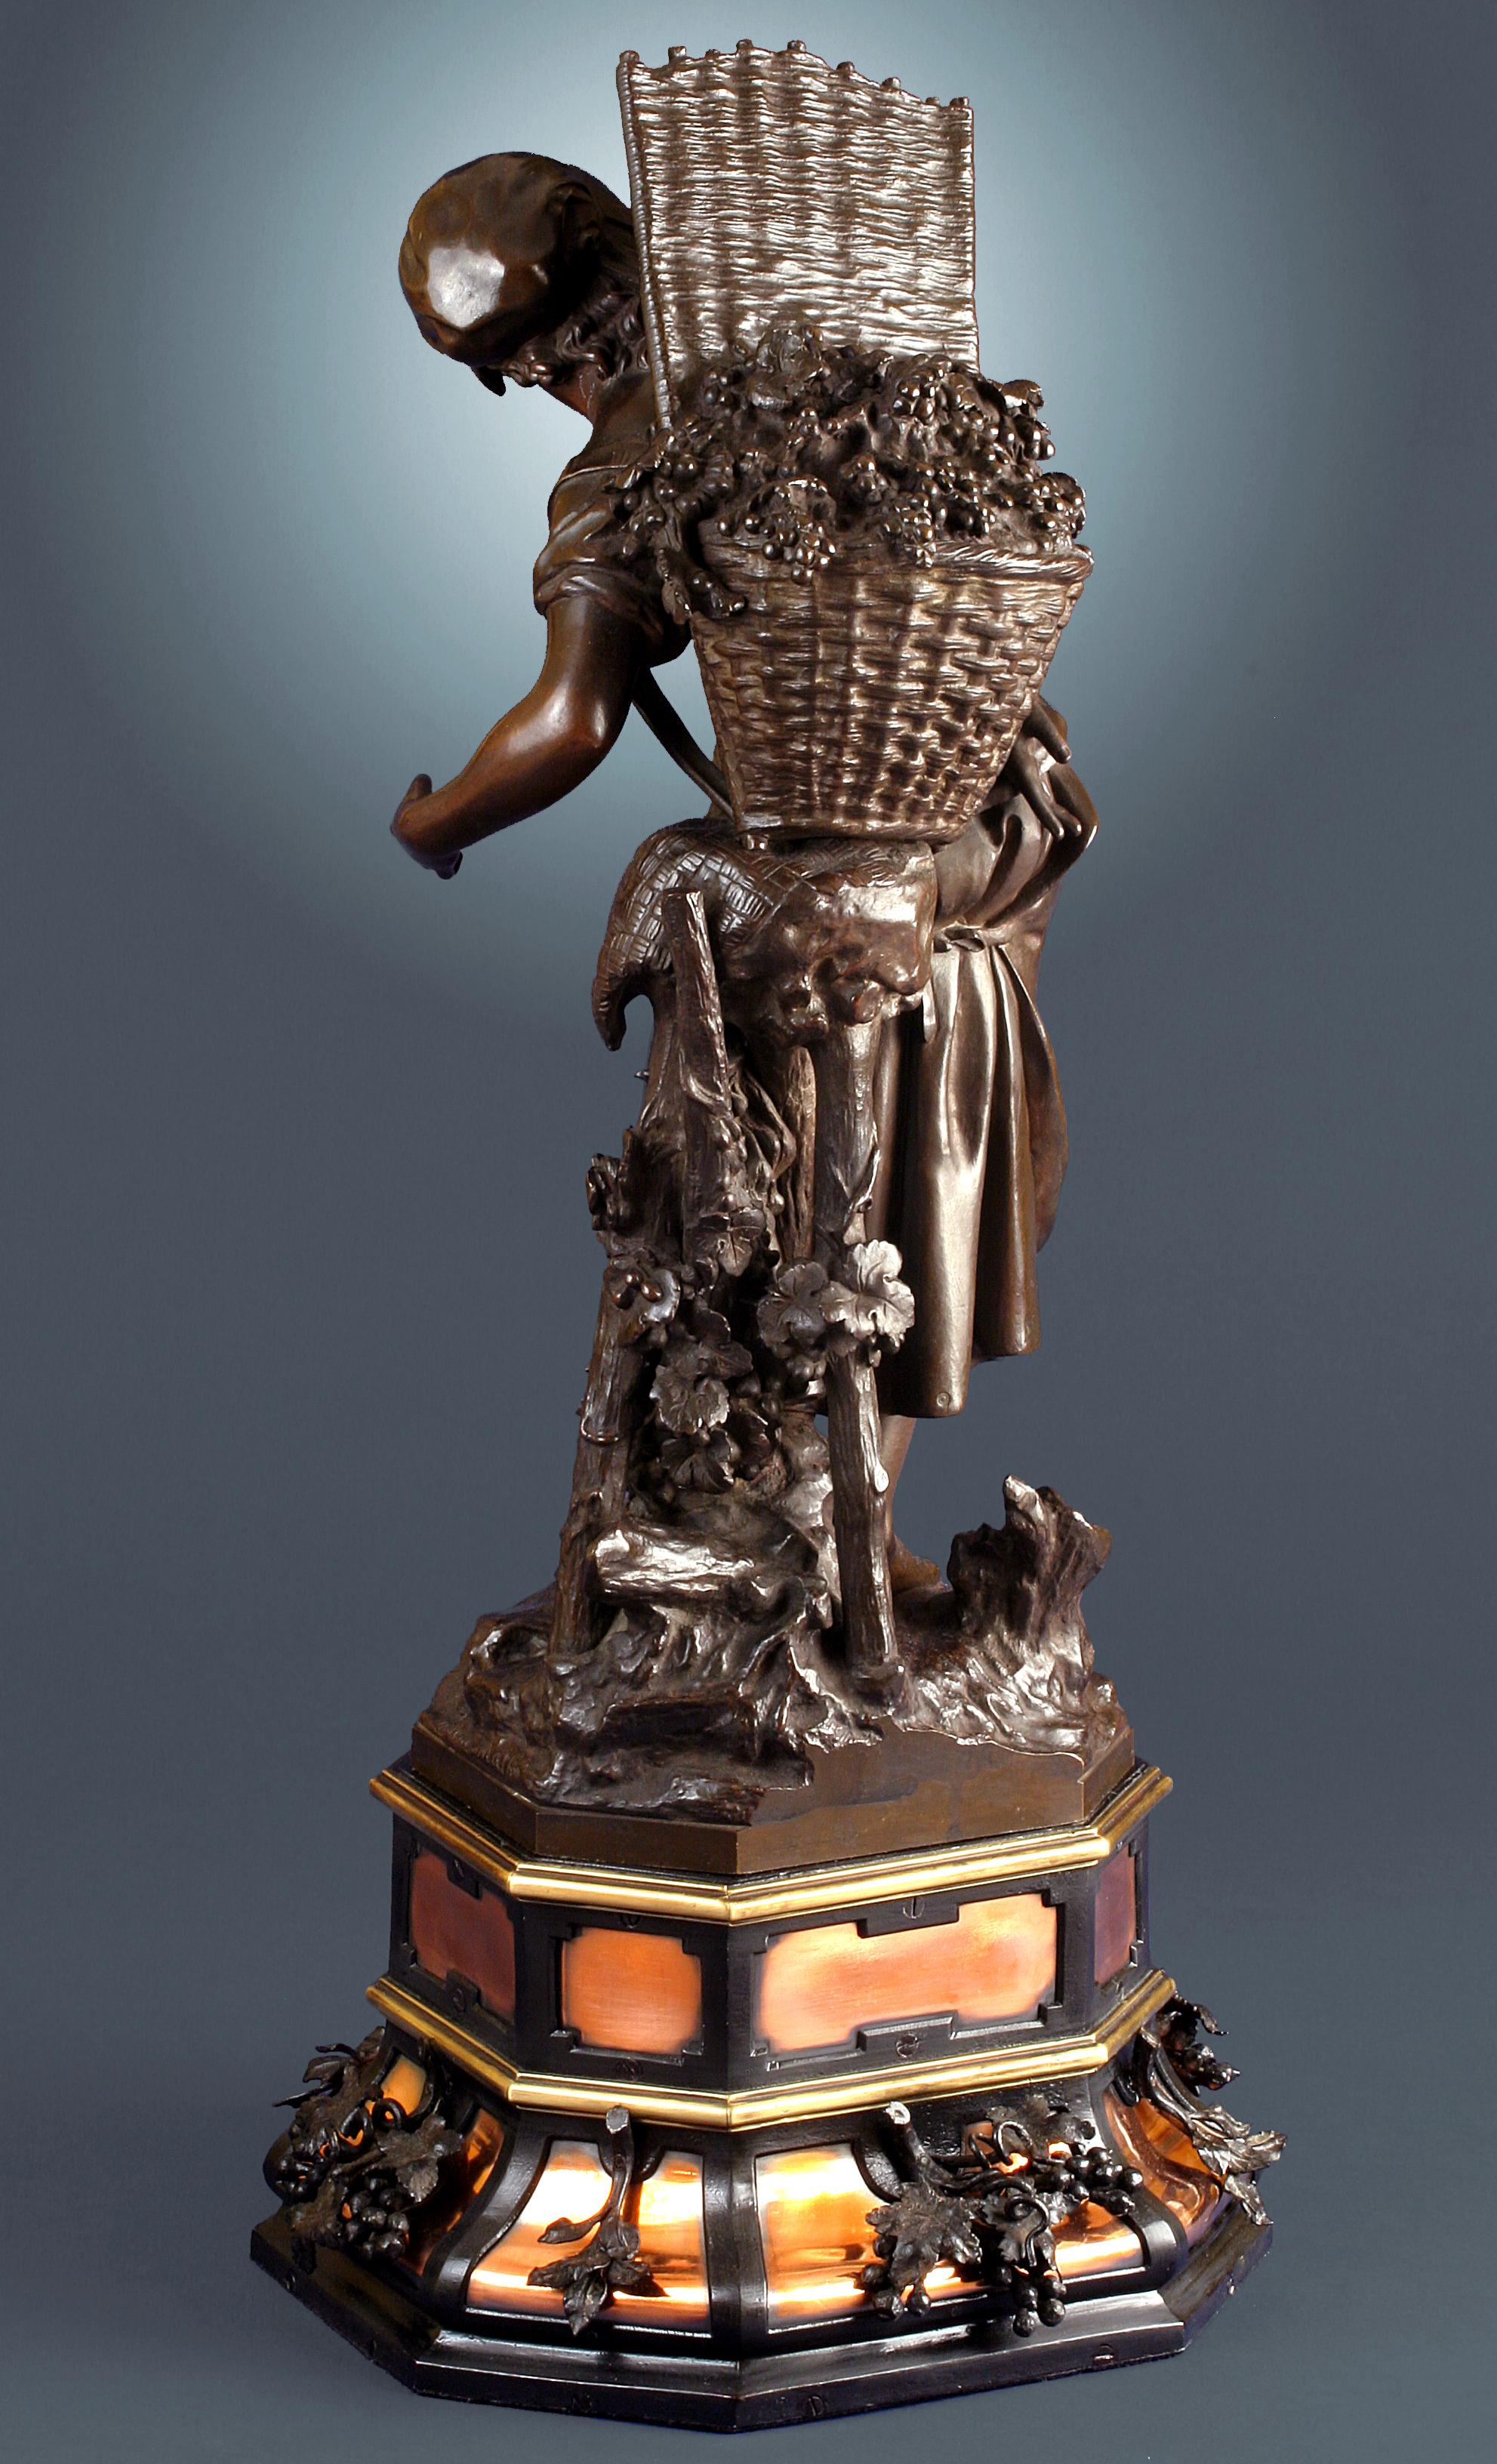 19th Century sculpture of Female in Bronze, titled 